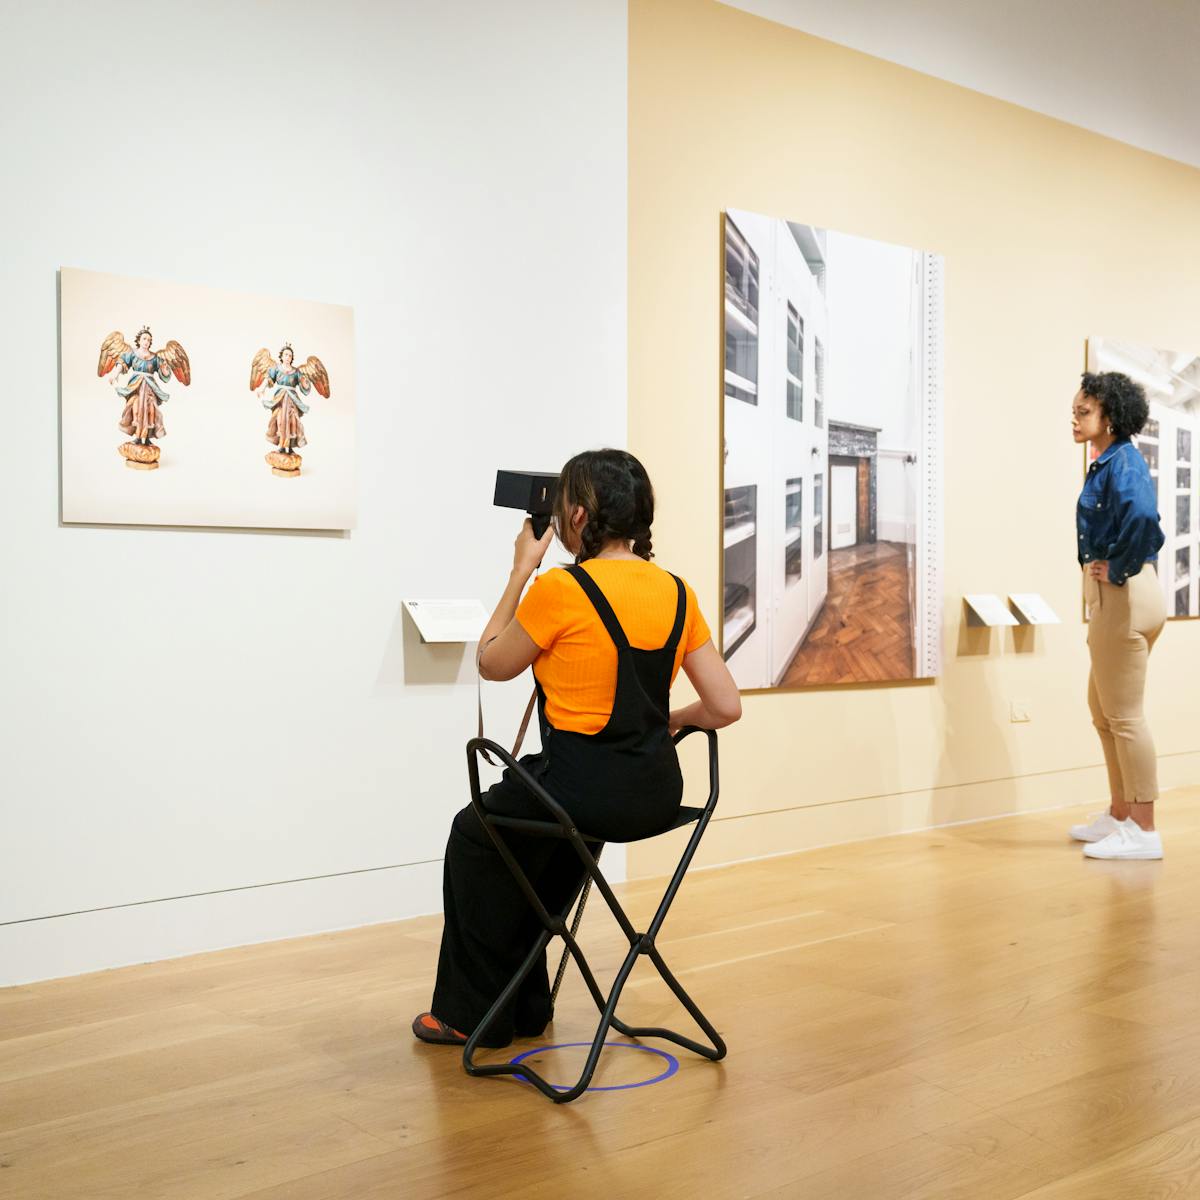 Photograph of a gallery exhibition space showing large photographic prints mounted on the walls and free standing display boards. The colours of the room are light whites and yellows. Three people are exploring the space. One visitor wearing an orange t-shirt, sits on a gallery folding chair holding a stereoscopic viewer to their eyes, focusing on a photographic print on the wall depicting a ceramic angel figure, shown in duplicate. Another visitor to the right wearing a green jumper is also looking through a stereoscopic viewer at a print on the wall. In-between them another visitor in a denim shirt is looking at a large photographic print of a museum storeroom.